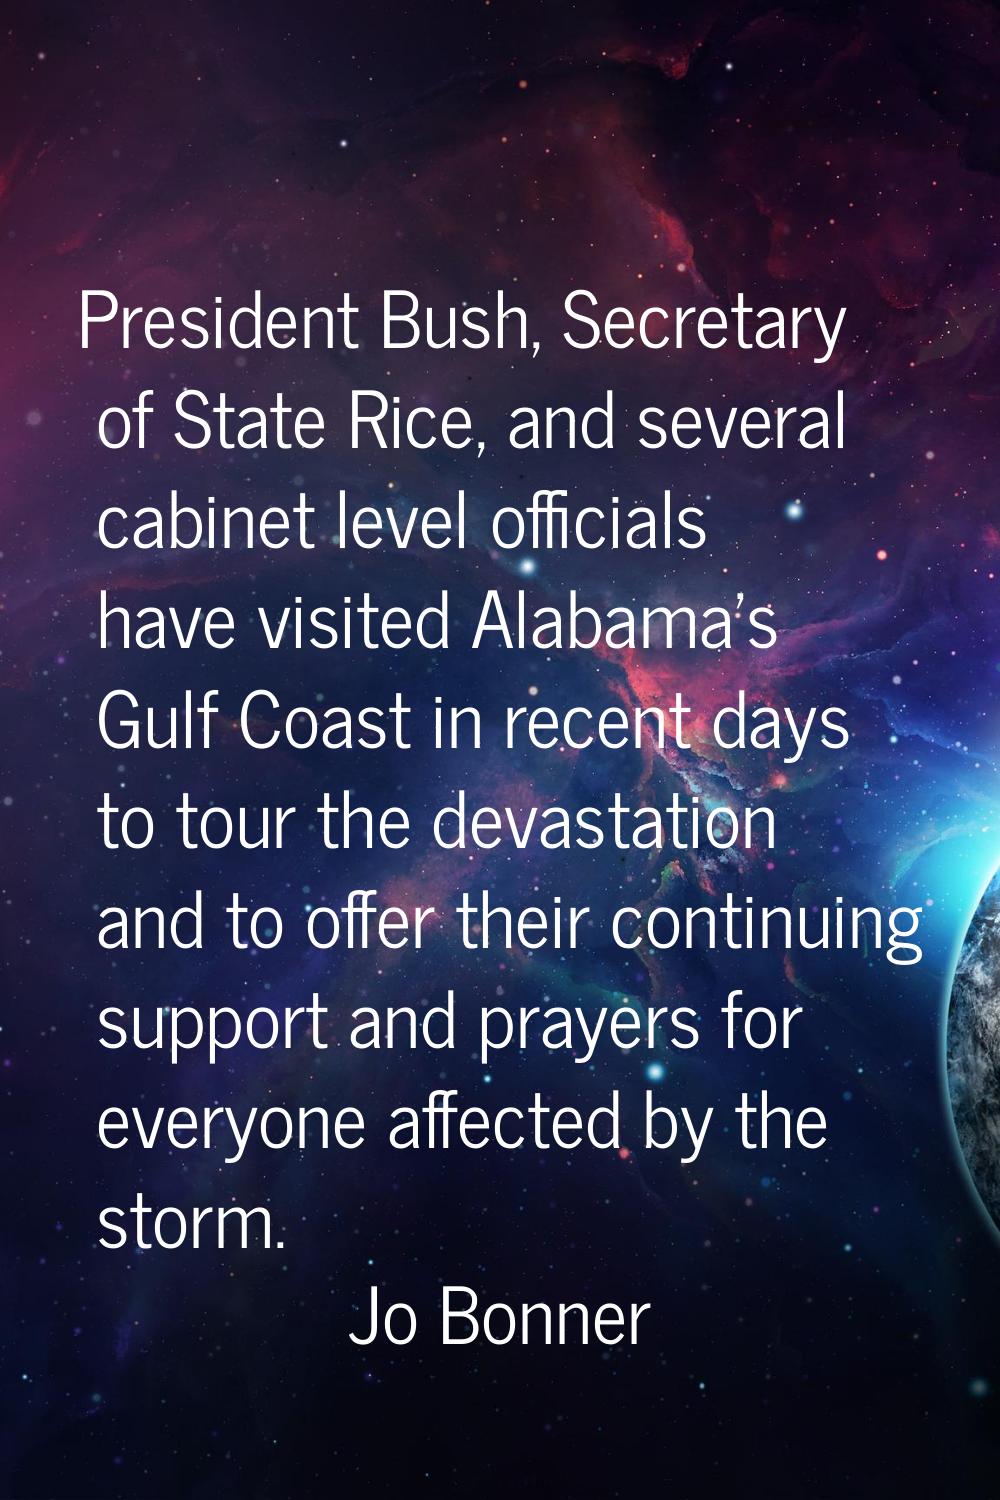 President Bush, Secretary of State Rice, and several cabinet level officials have visited Alabama's